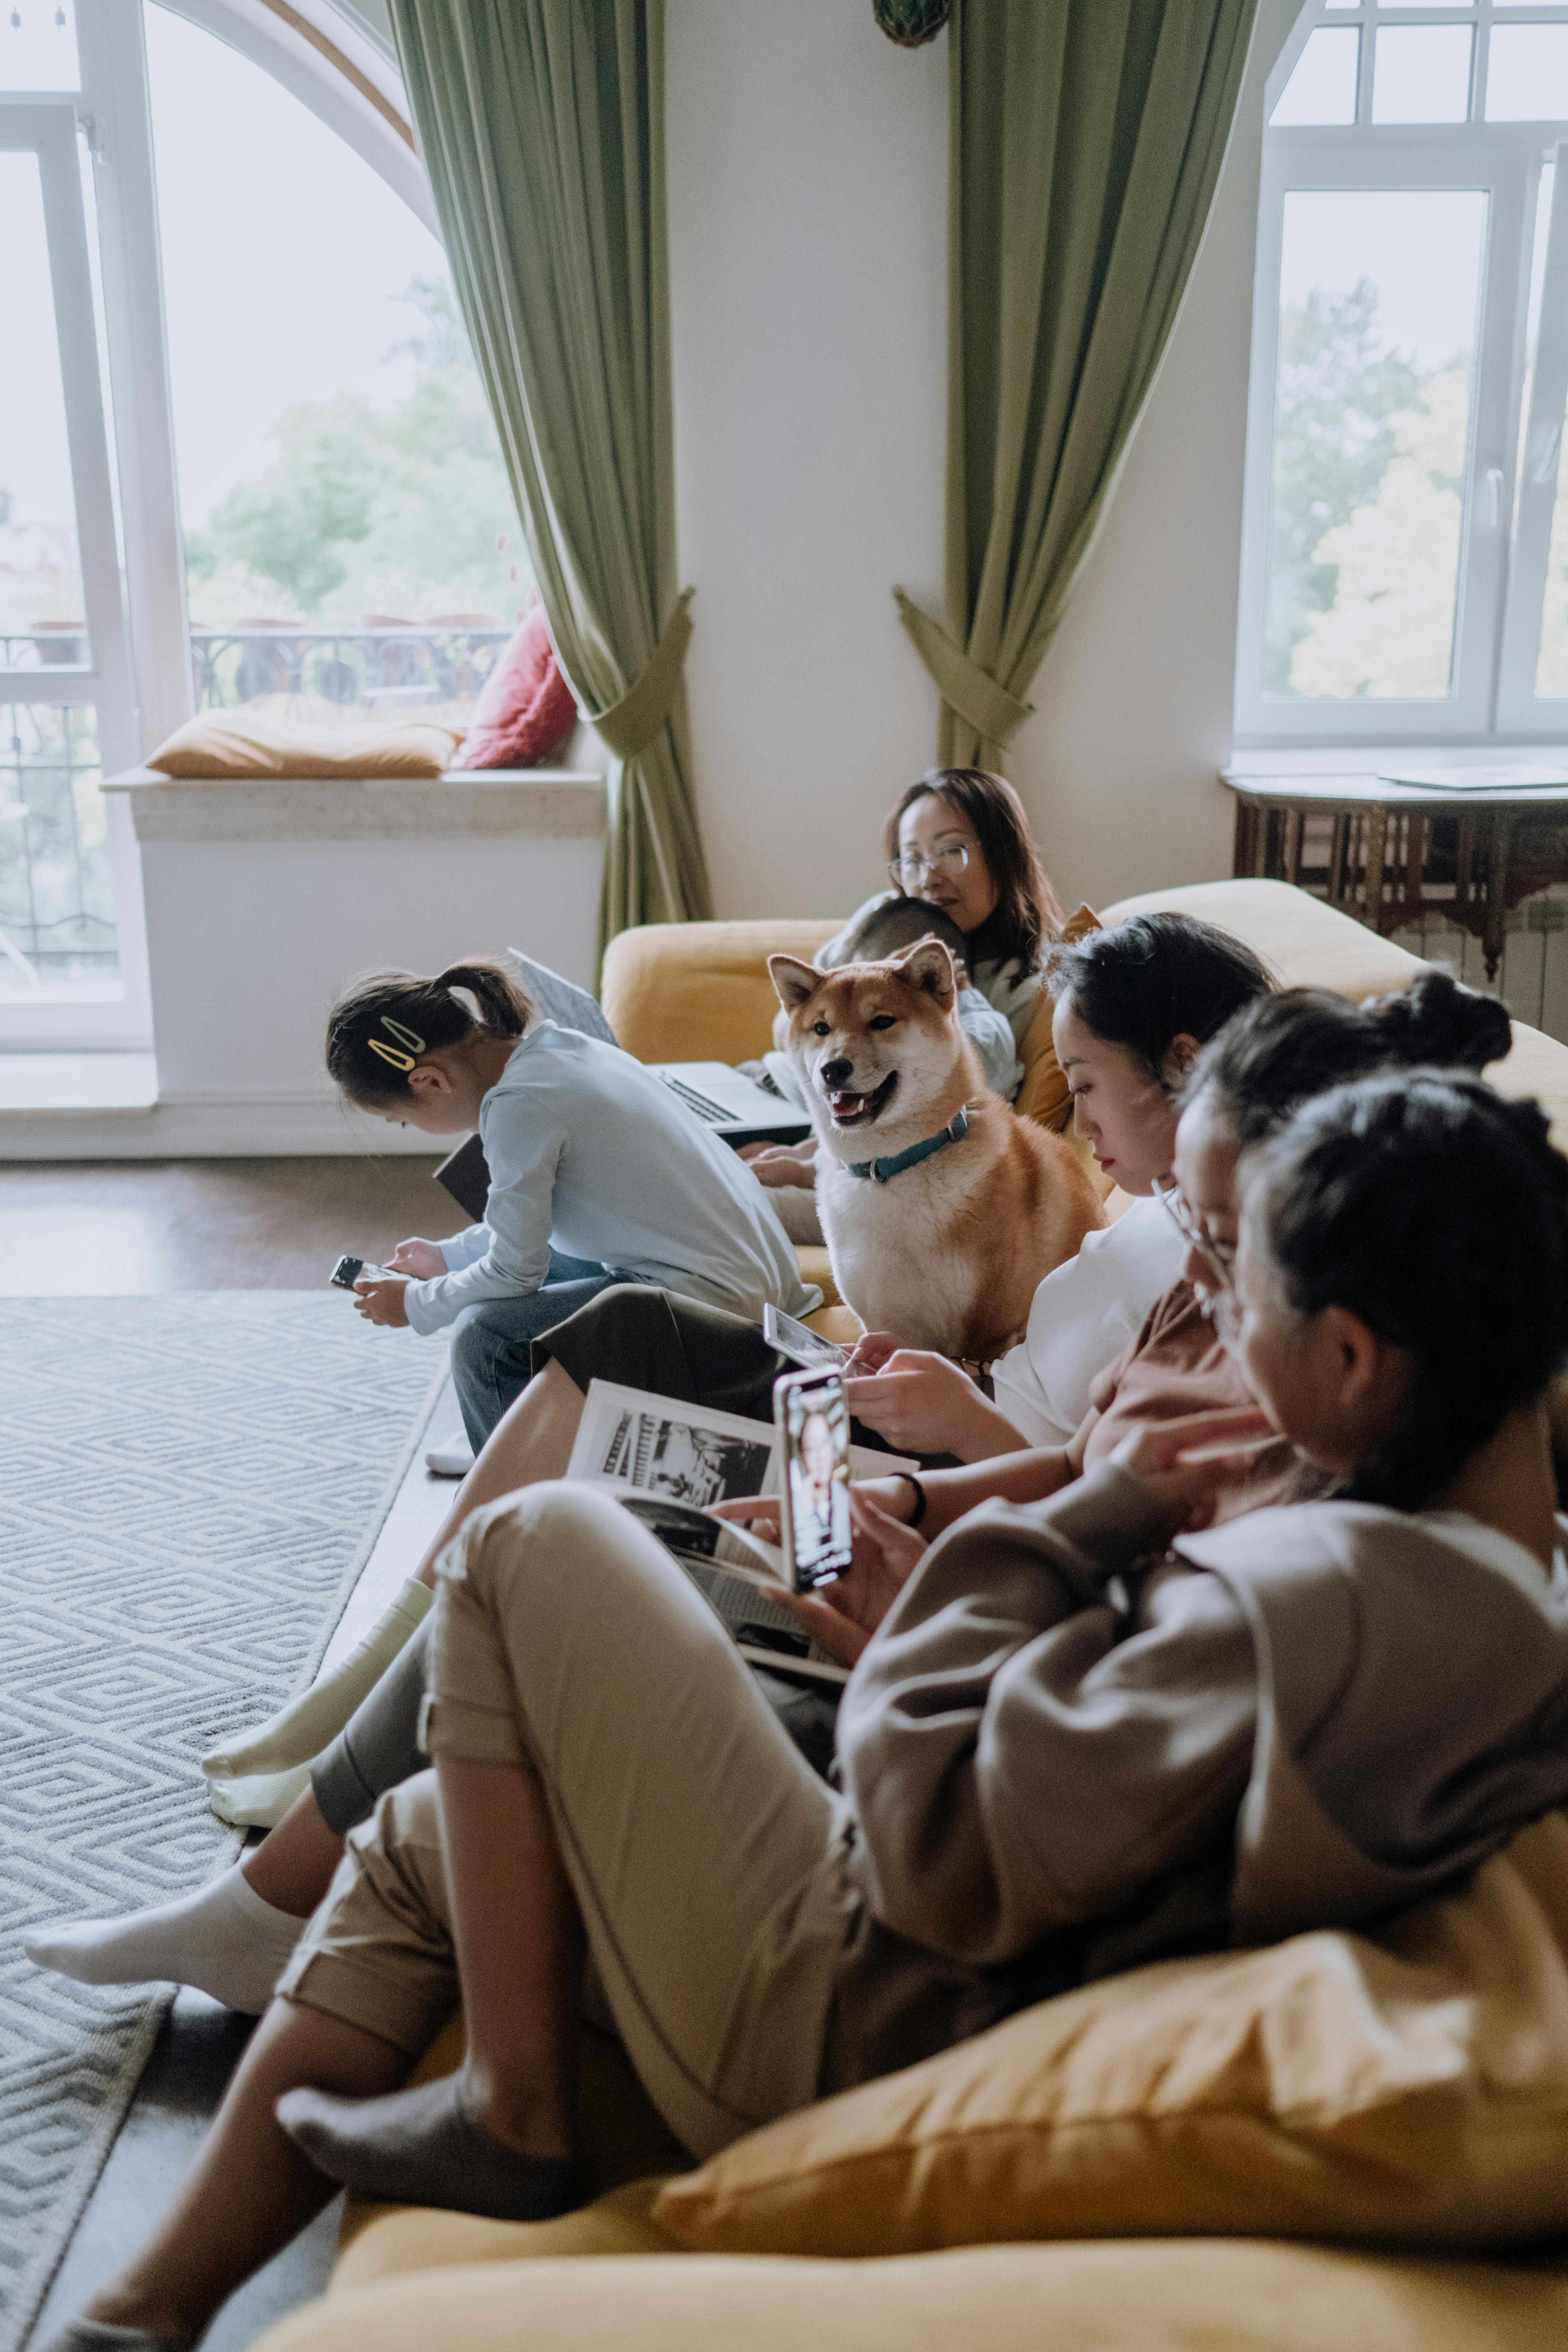 A large family sitting on a couch | Source: Pexels